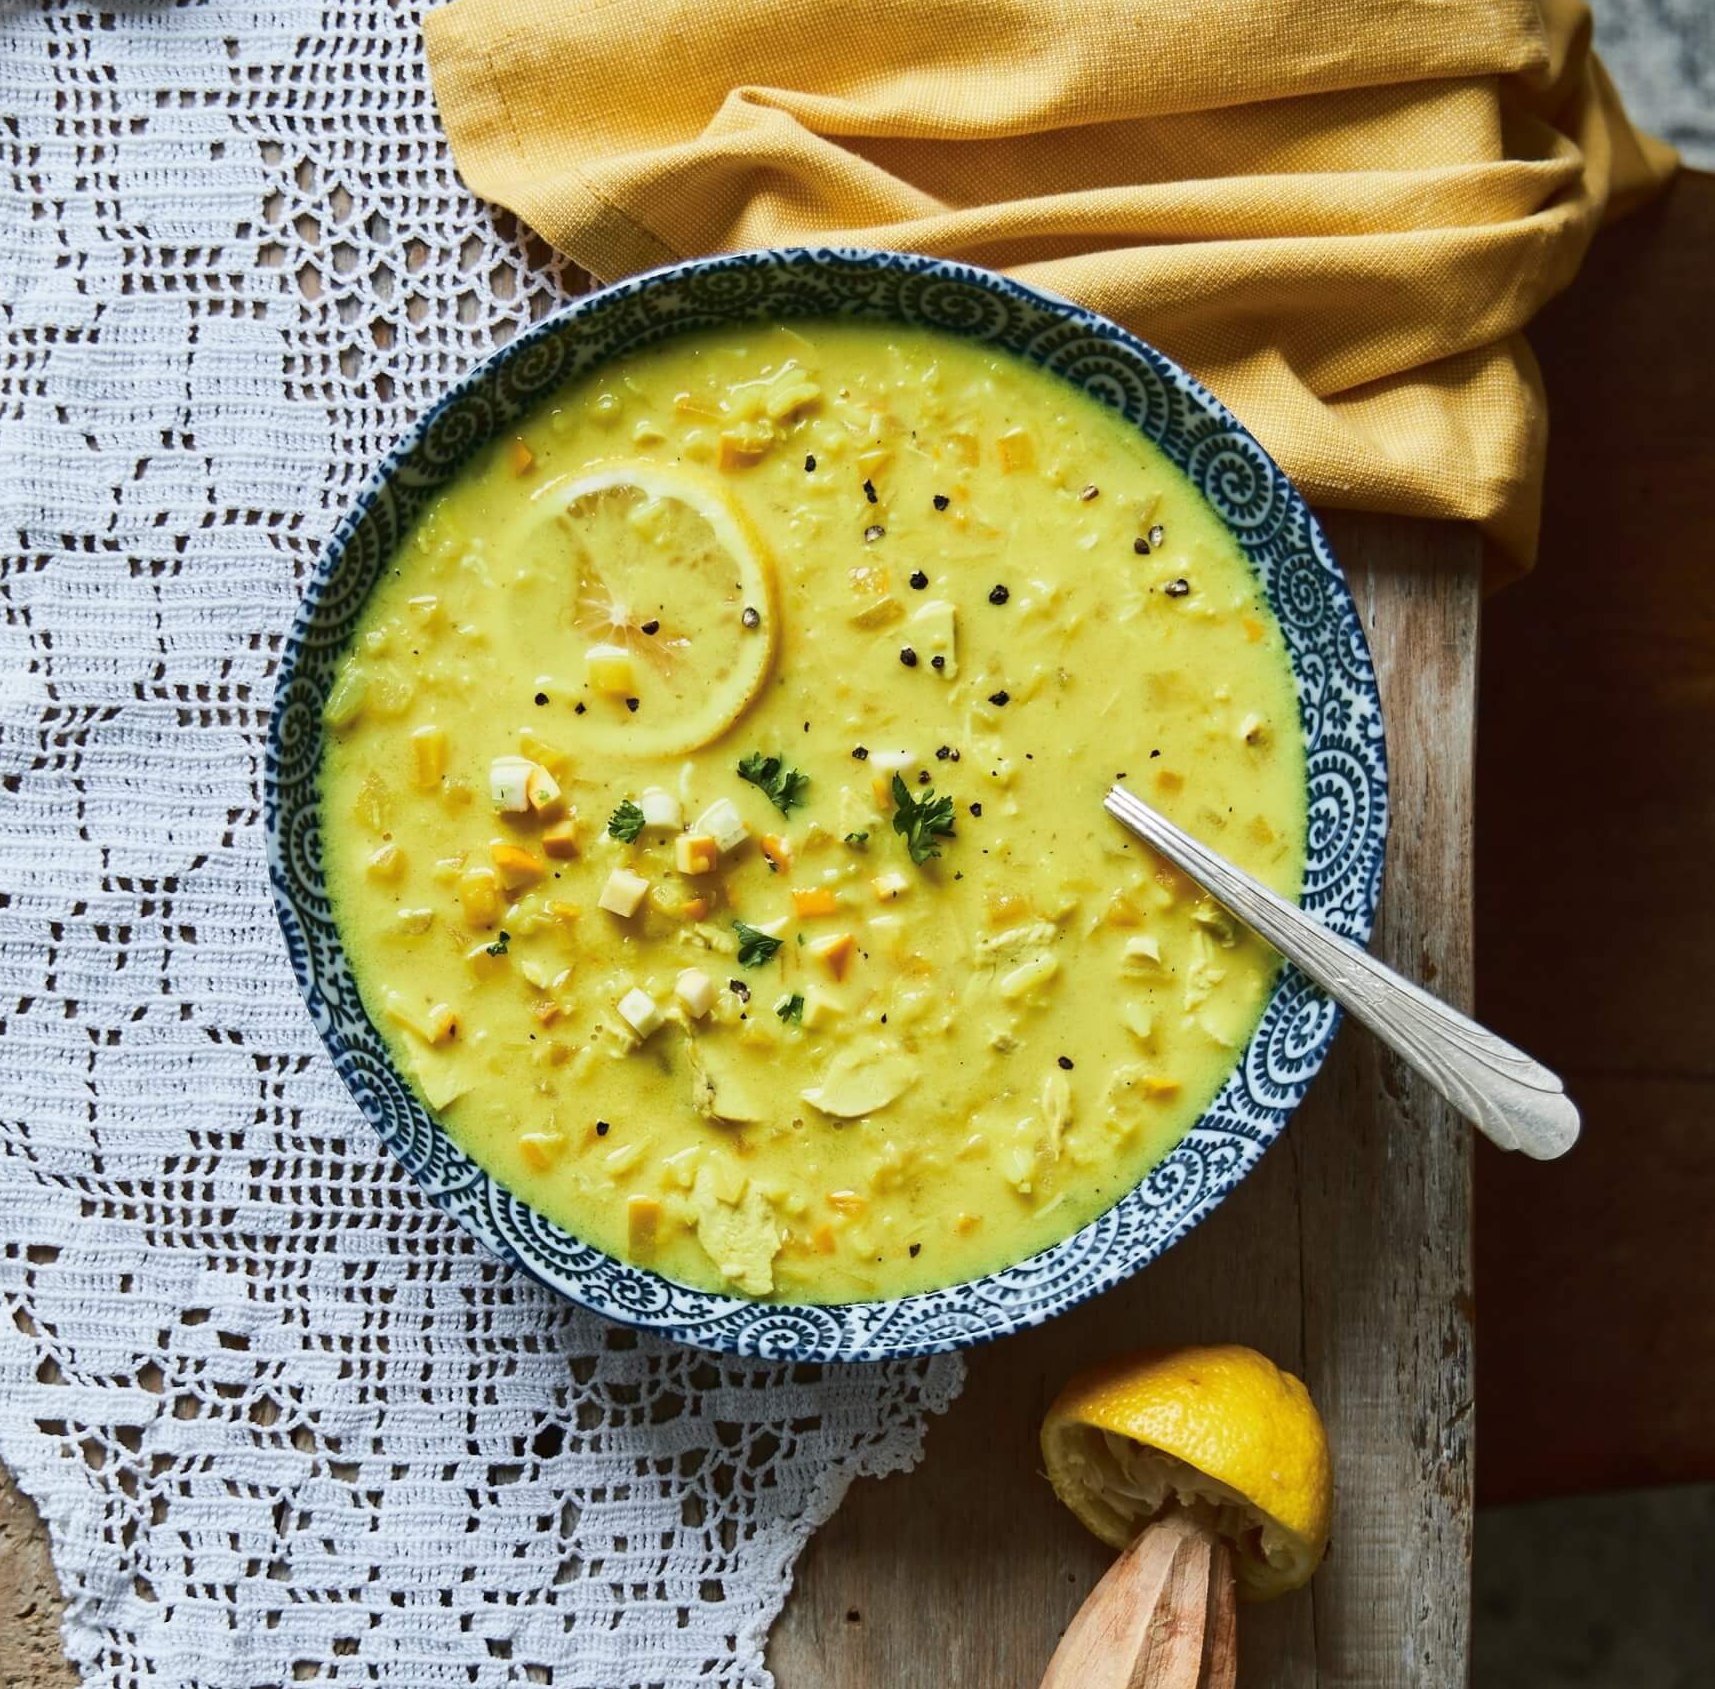 A bowl of yellow soup on a doily